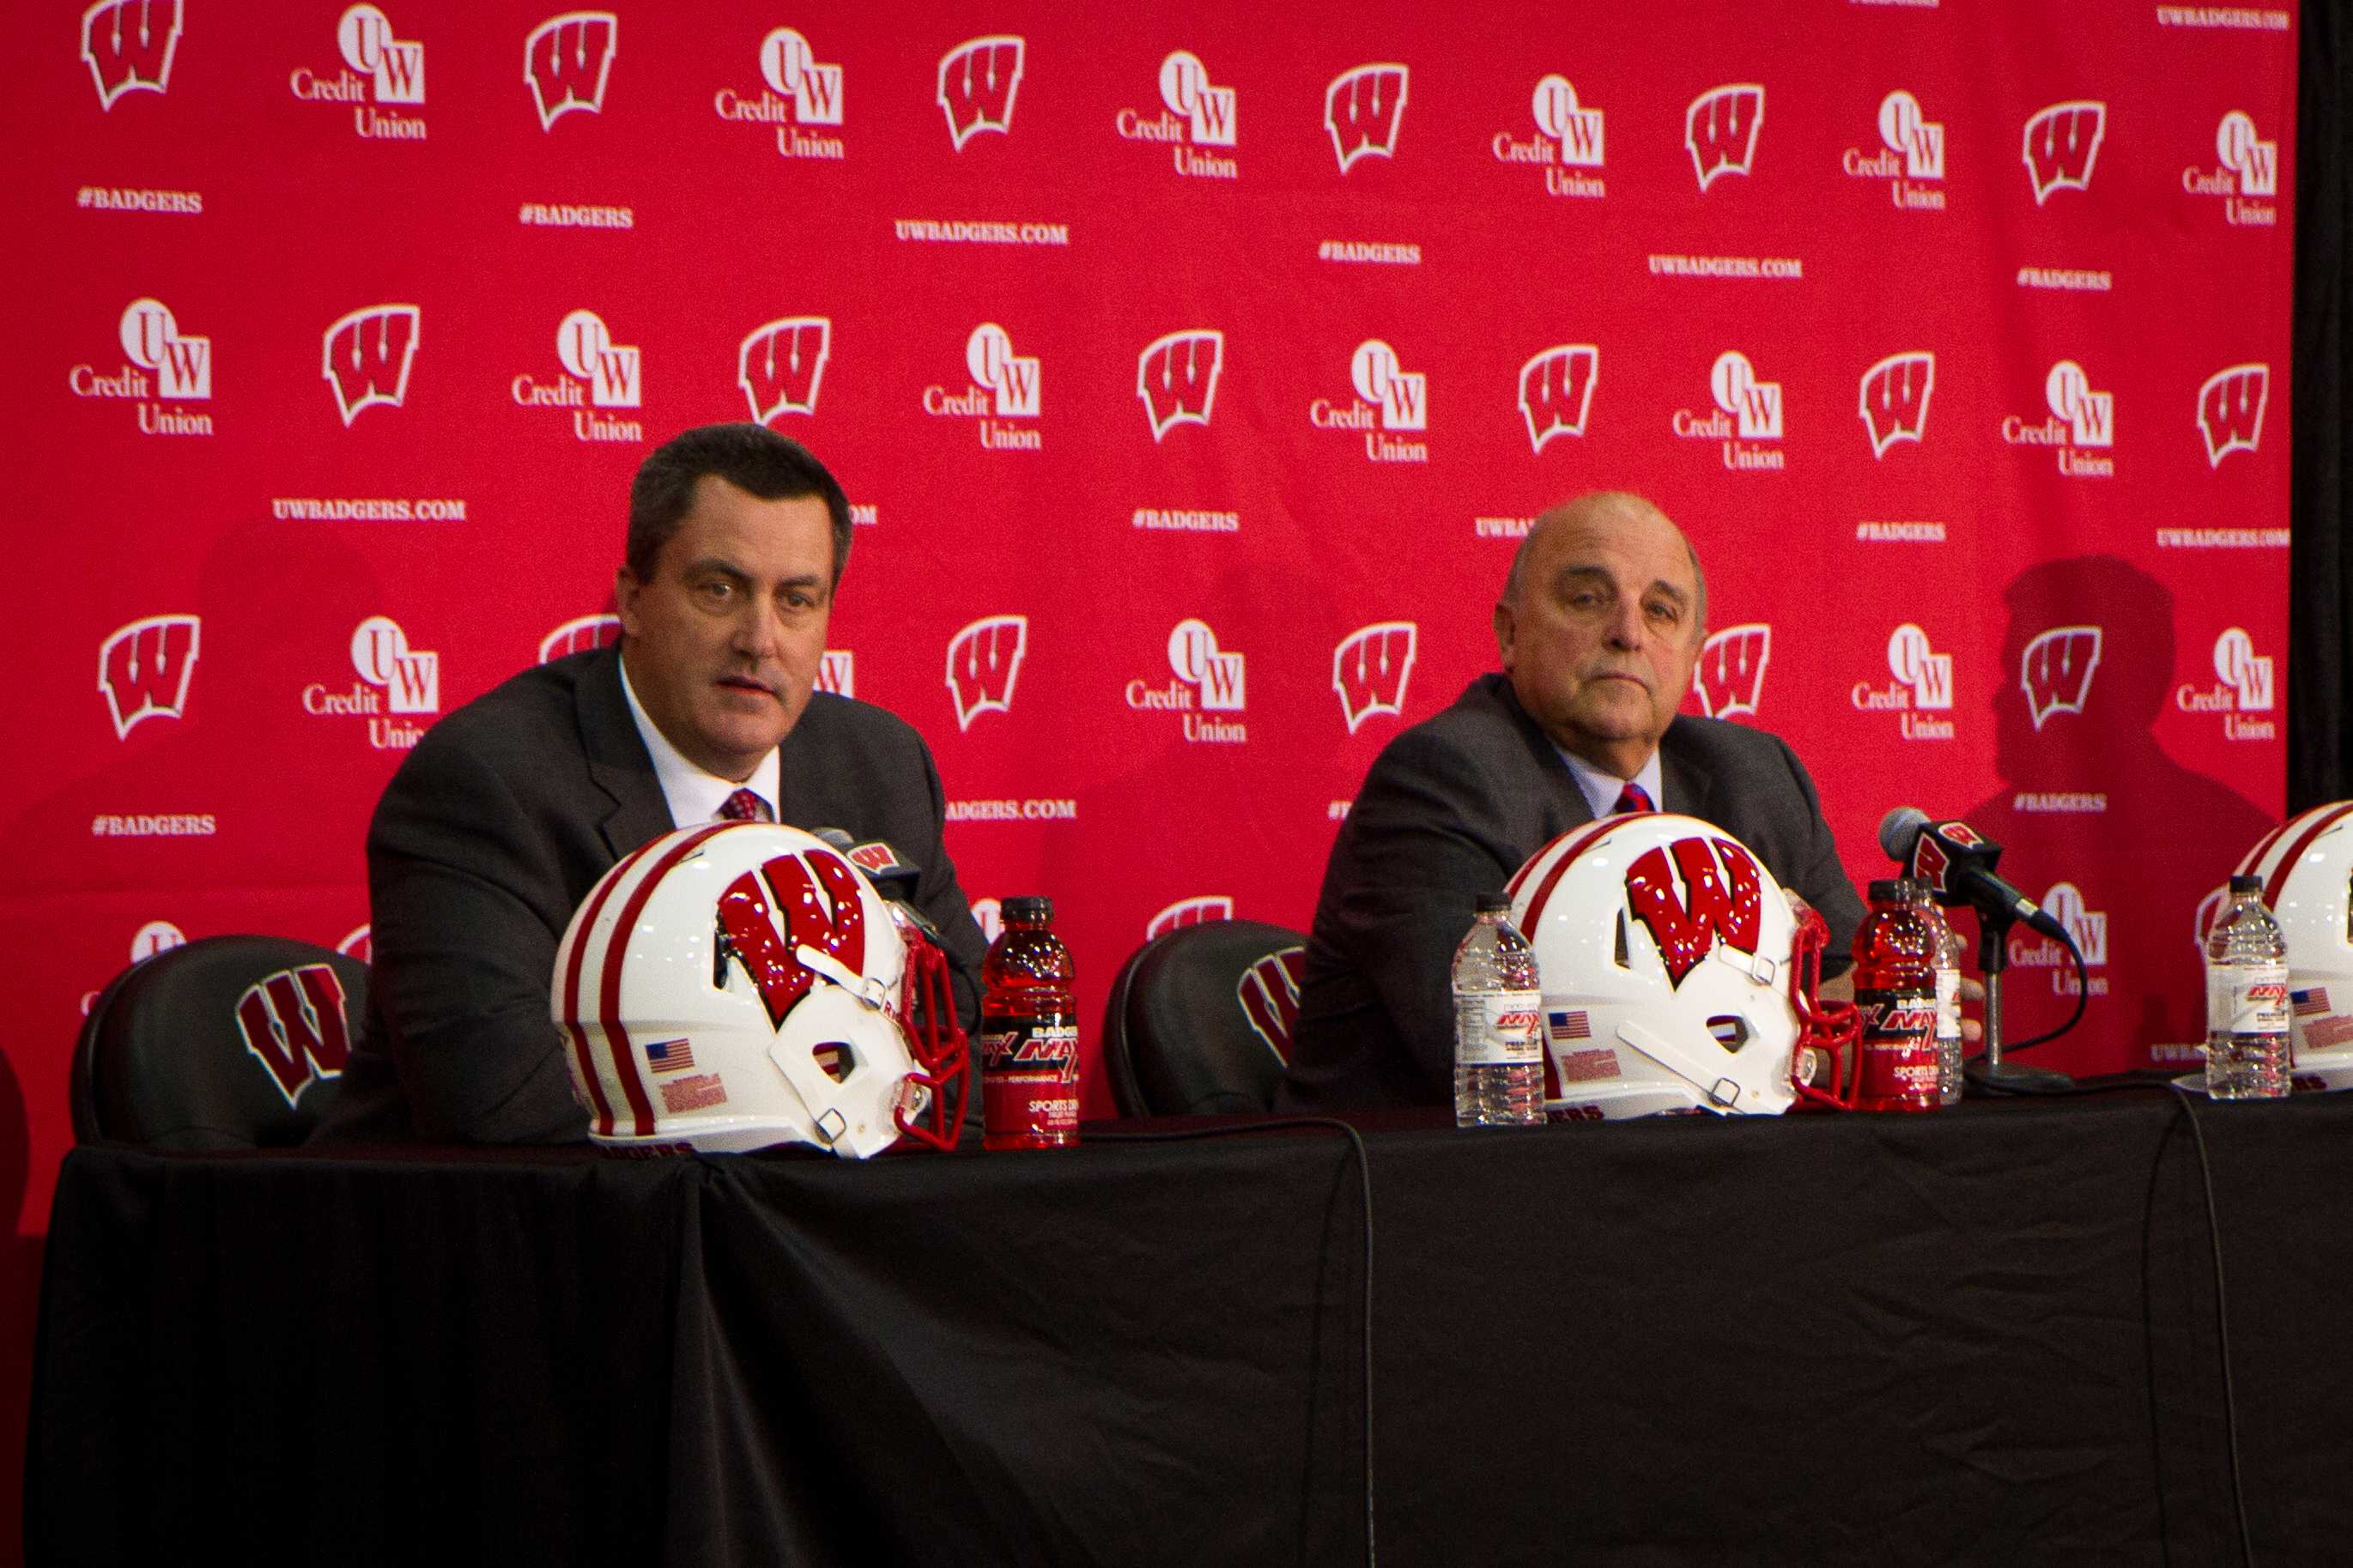 It's official: Chryst hired as new Wisconsin head coach · The Badger Herald